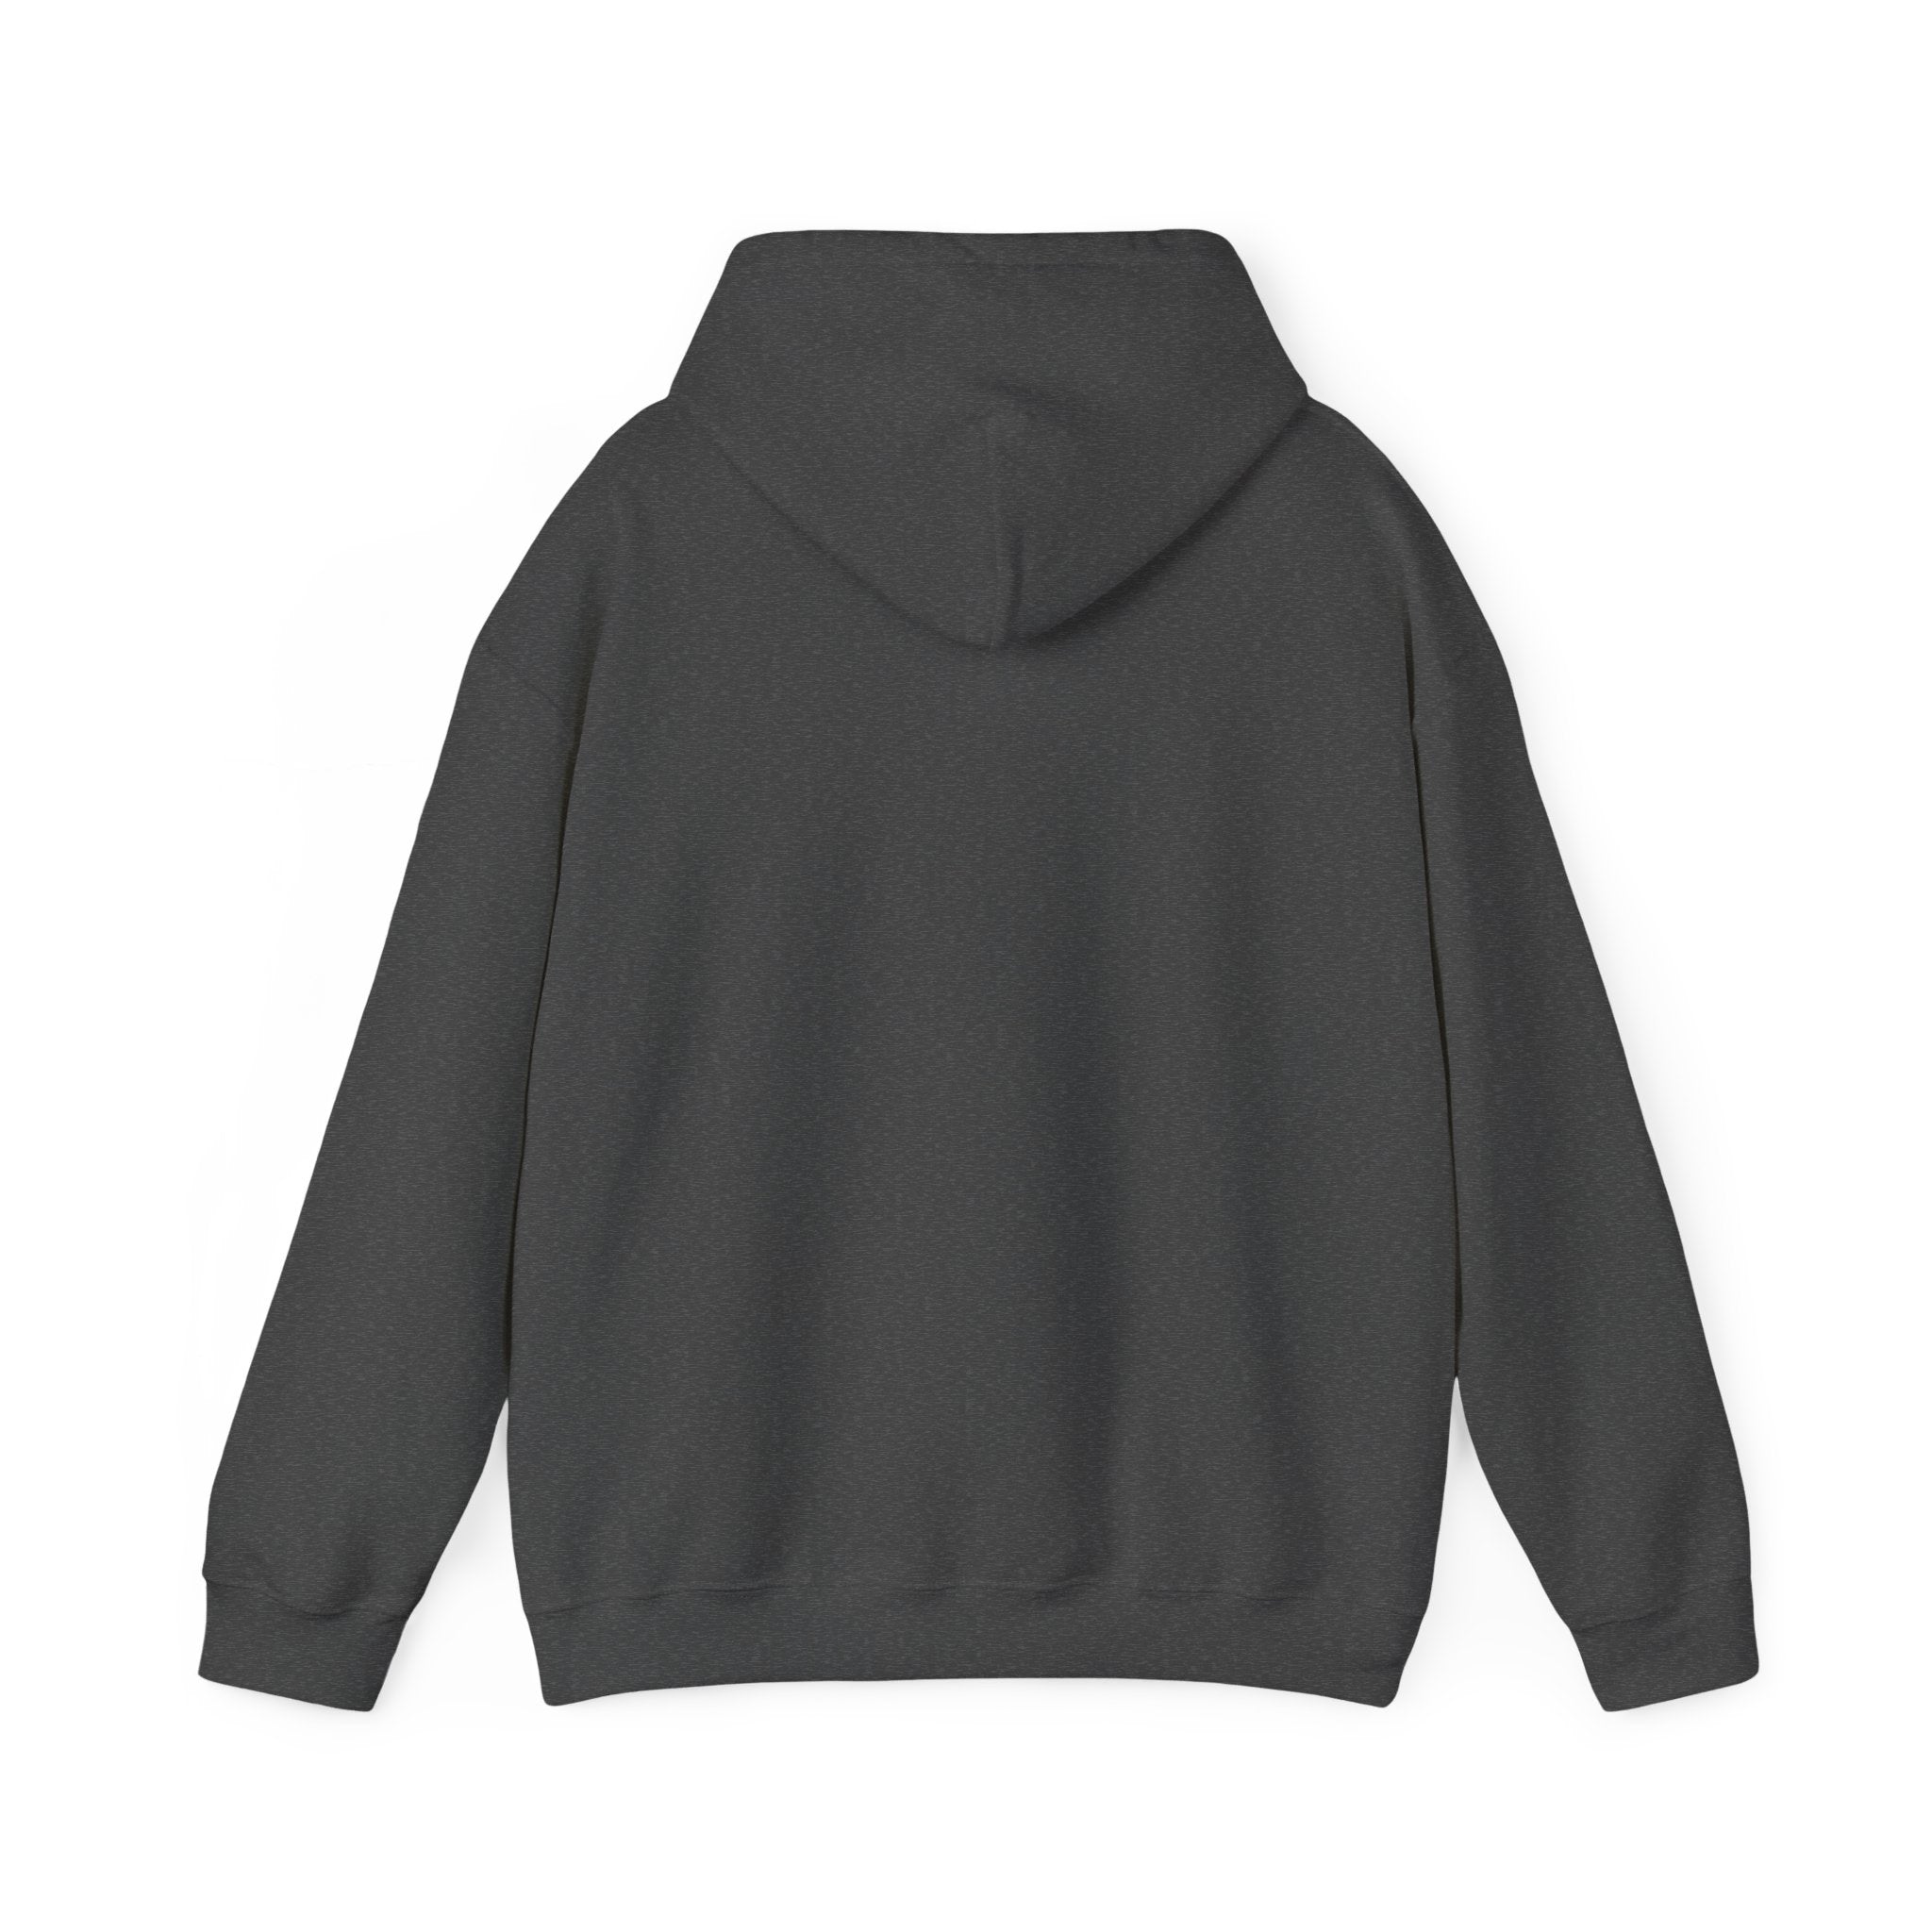 A back view of the RU - Hooded Sweatshirt in dark gray, showcasing ultimate comfort and style with its long sleeves, displayed against a white background.